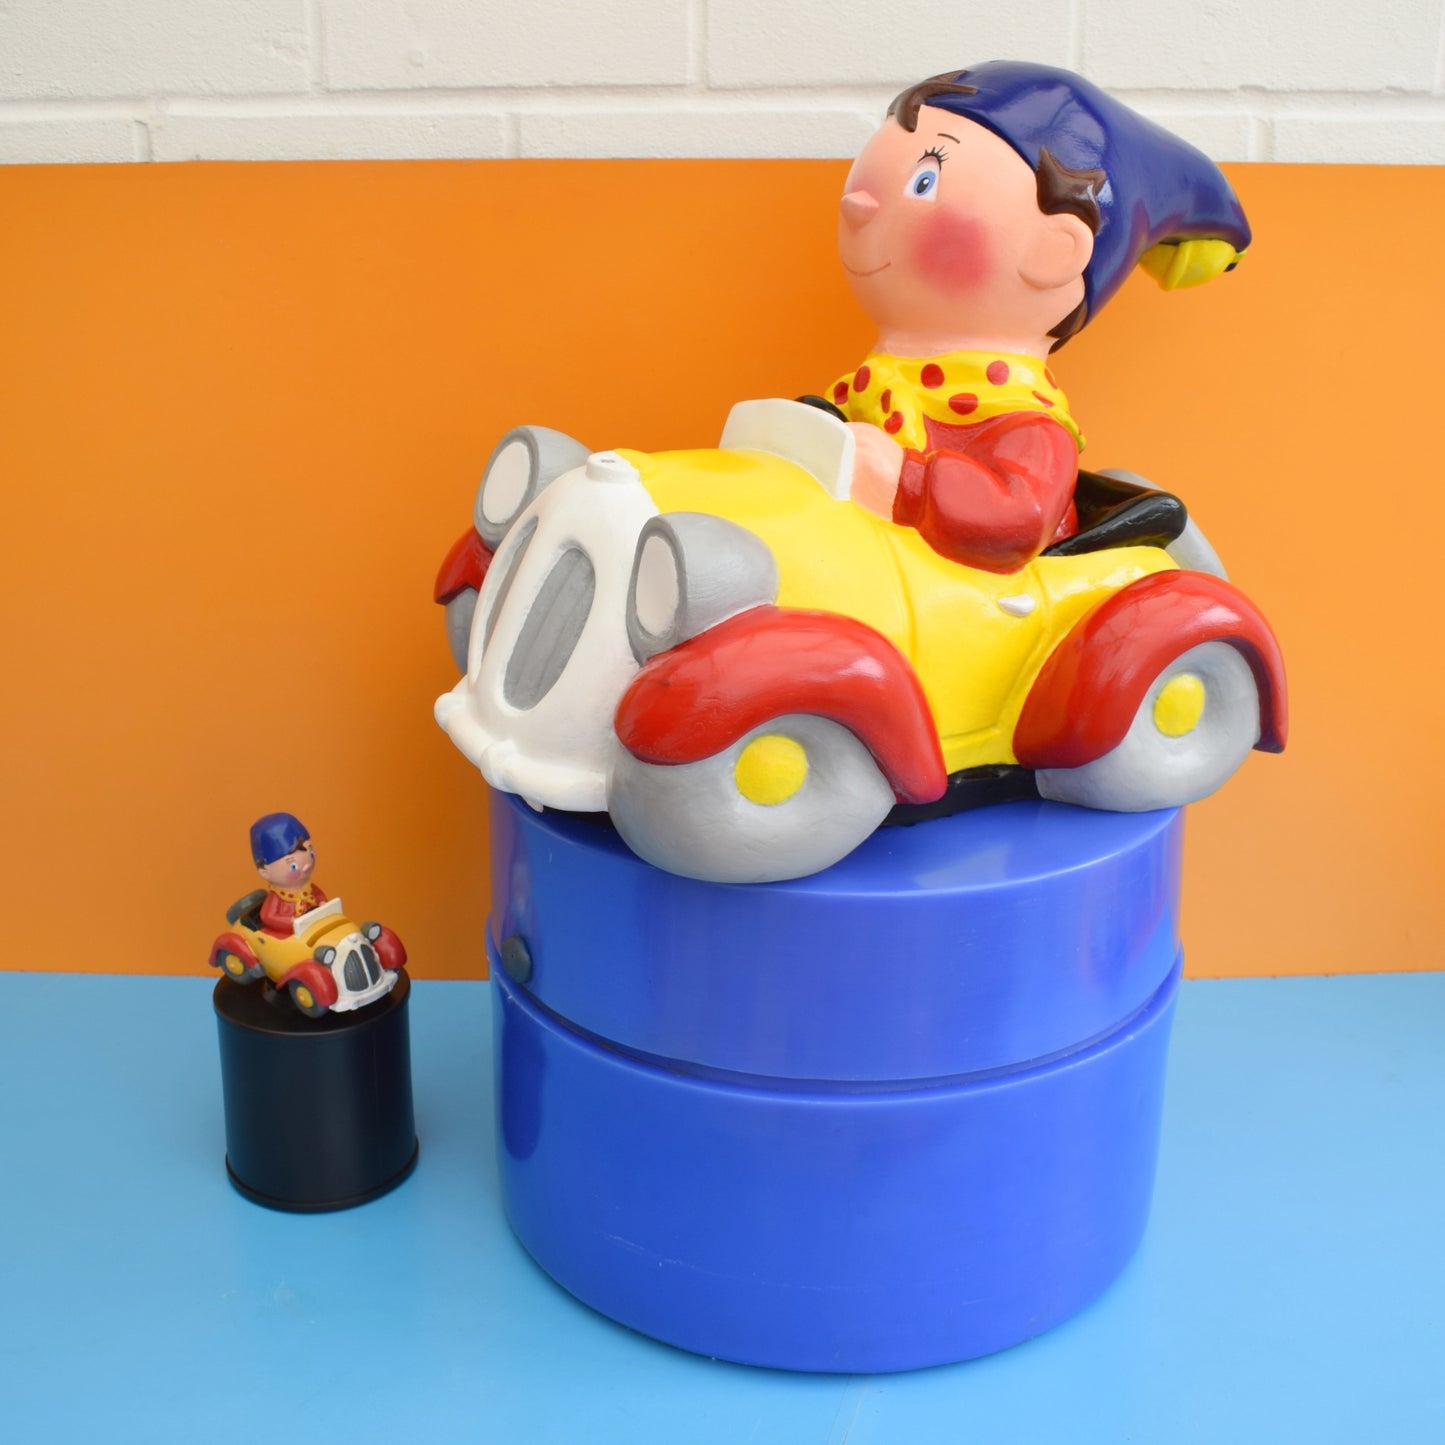 Vintage 1980s Large Noddy Charity Collection Box